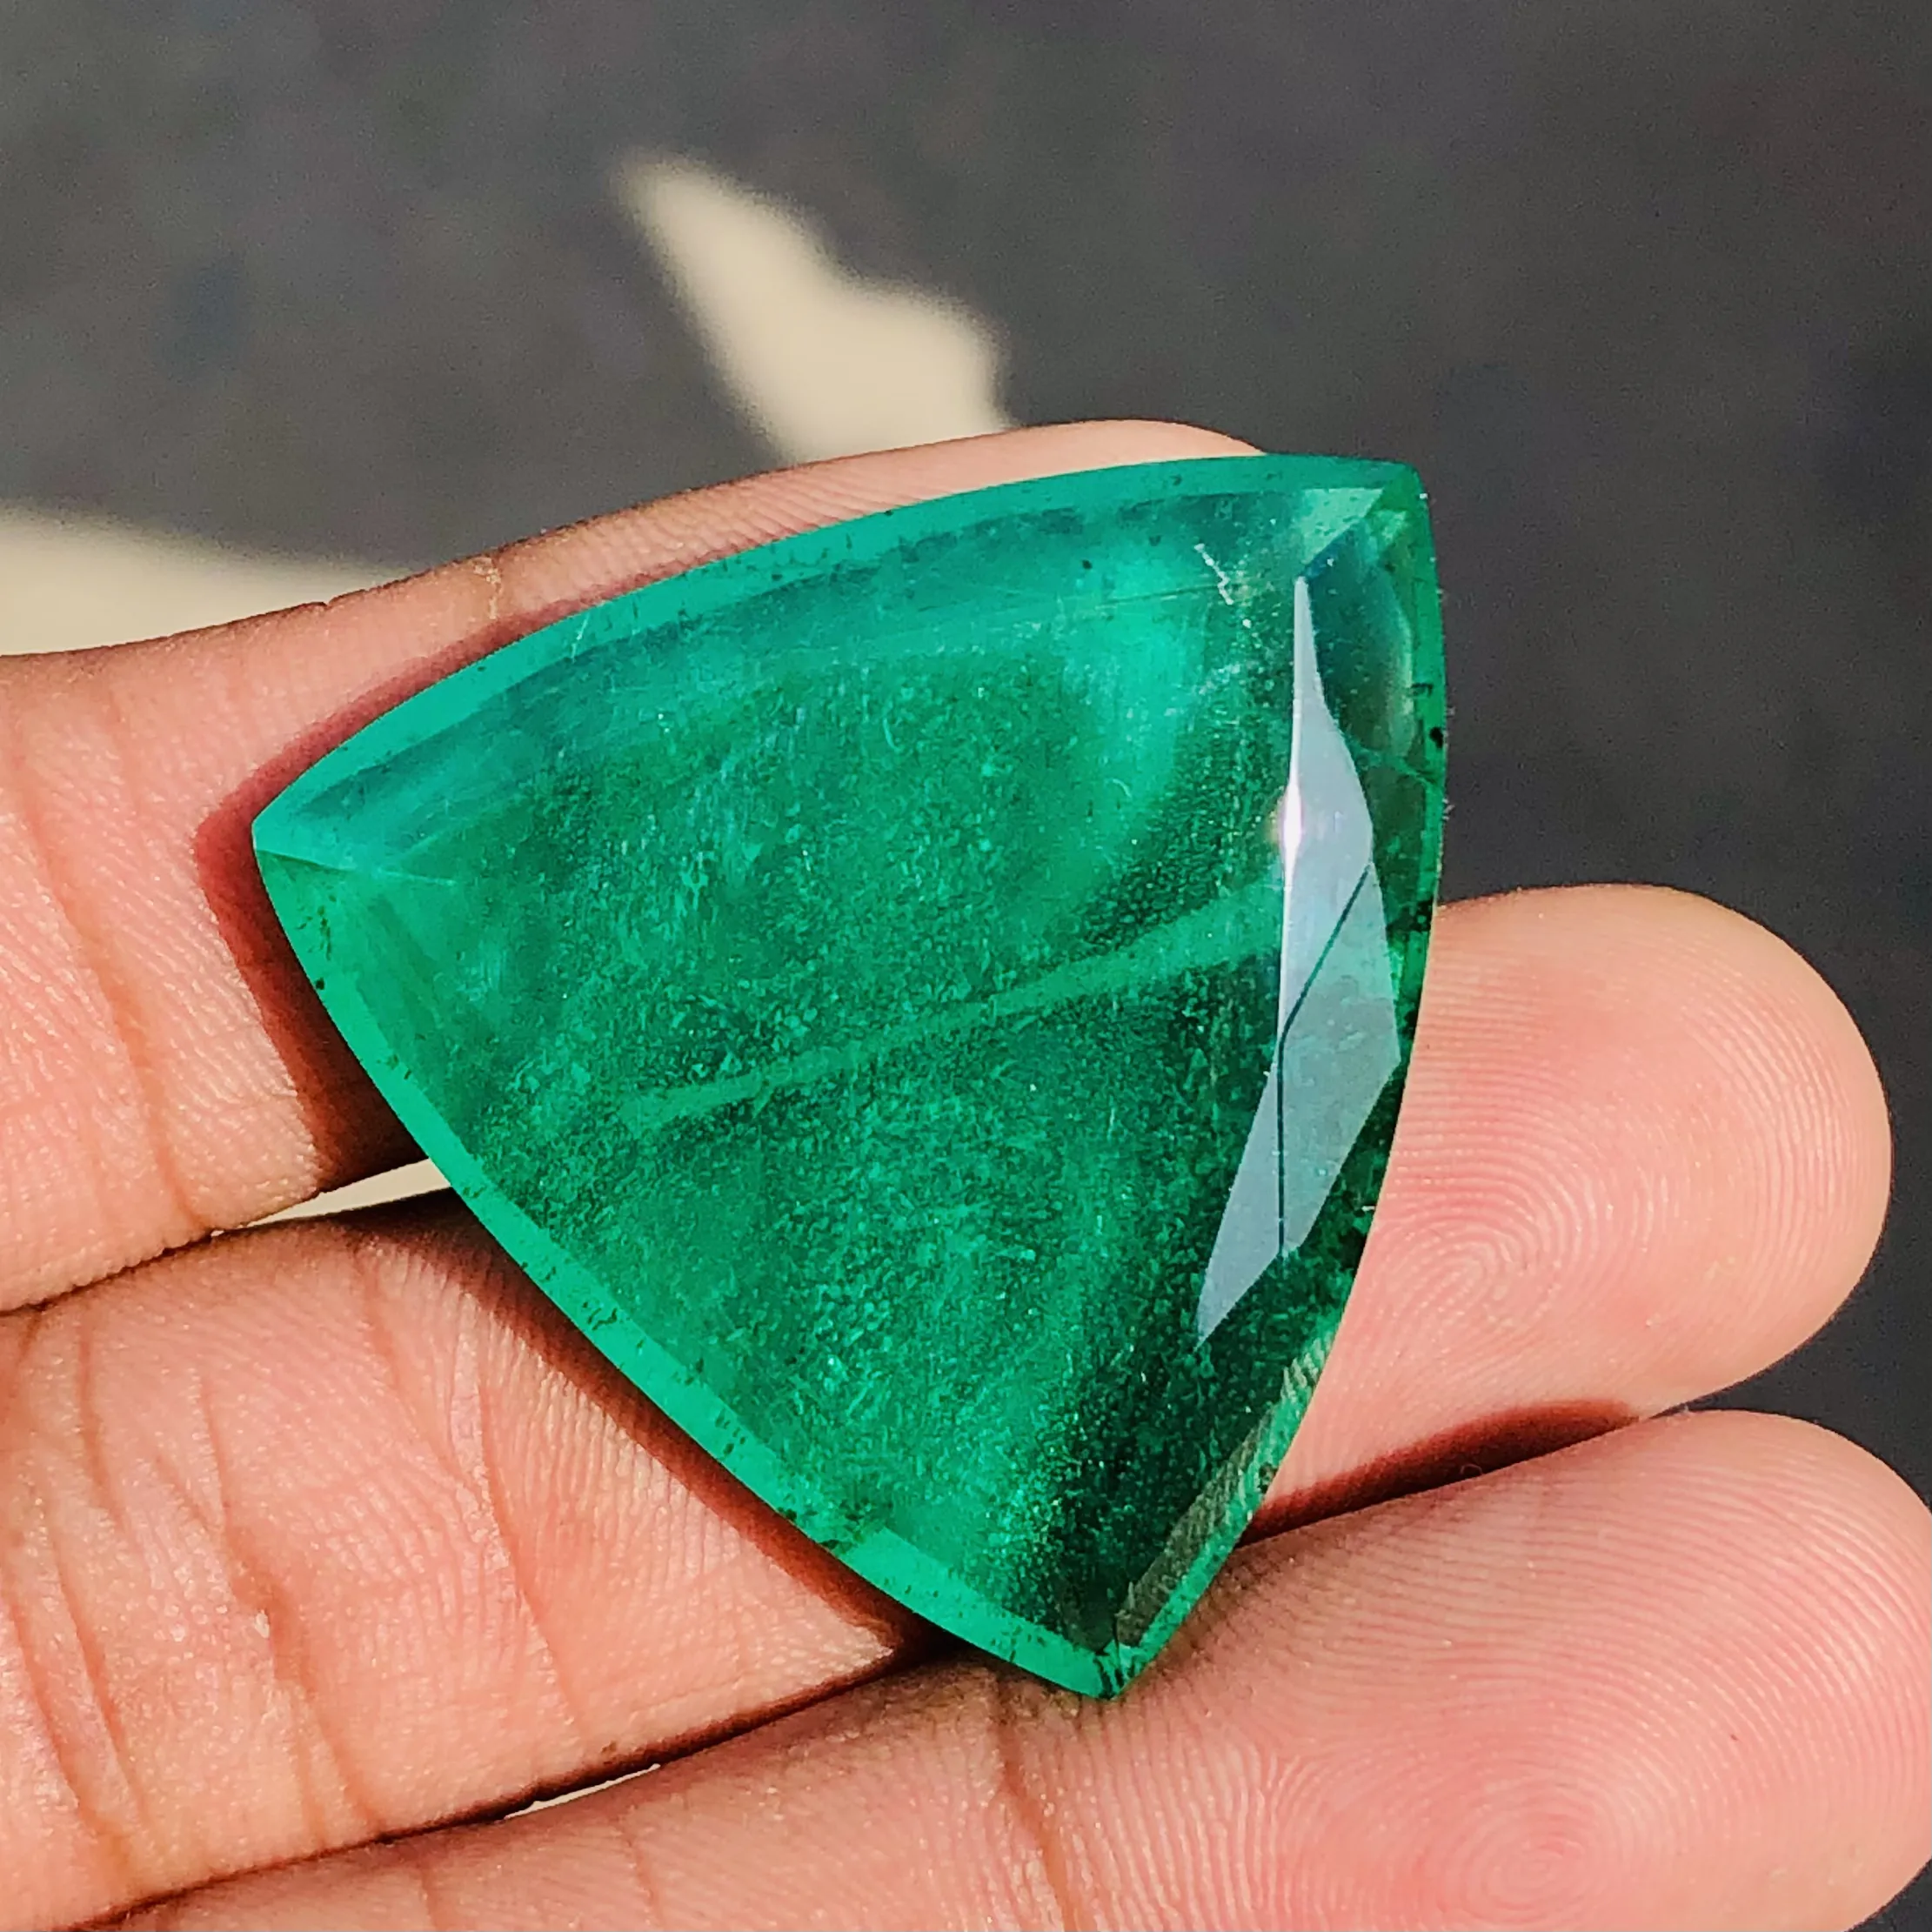 New Arrive Zambia Shade Emerald Doublet Quartz Cut Top Quality Loose Gemstone Calibrated Size For Making Jewelry